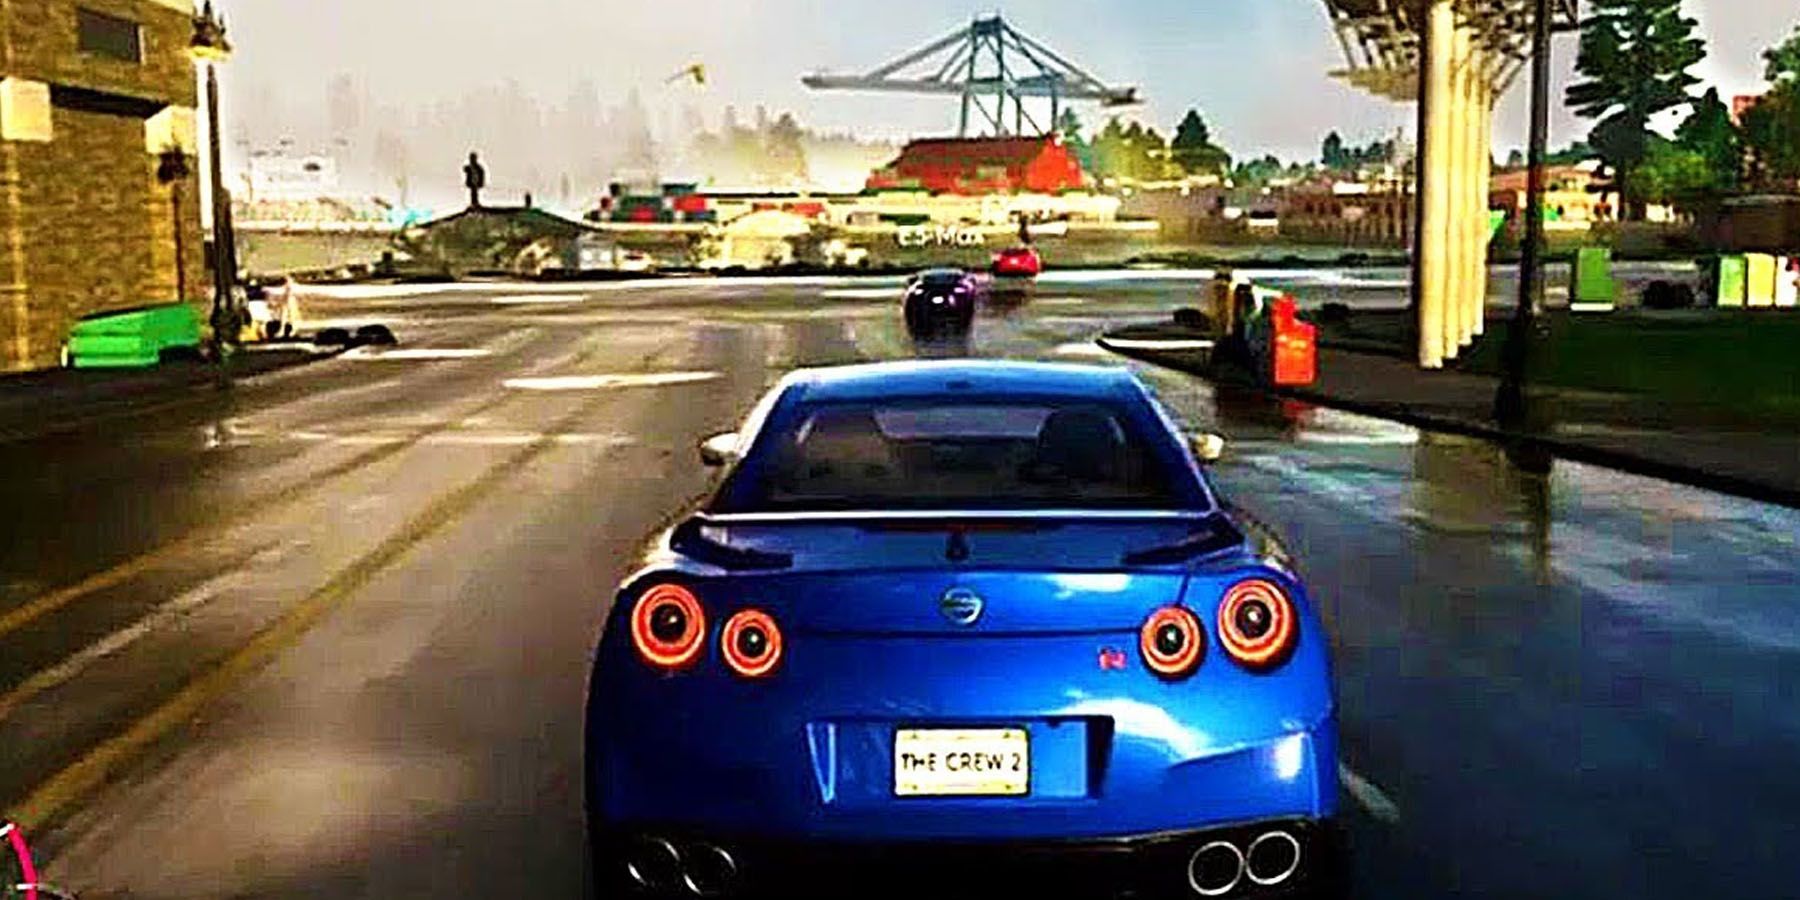 A blue car driving in The Crew 2